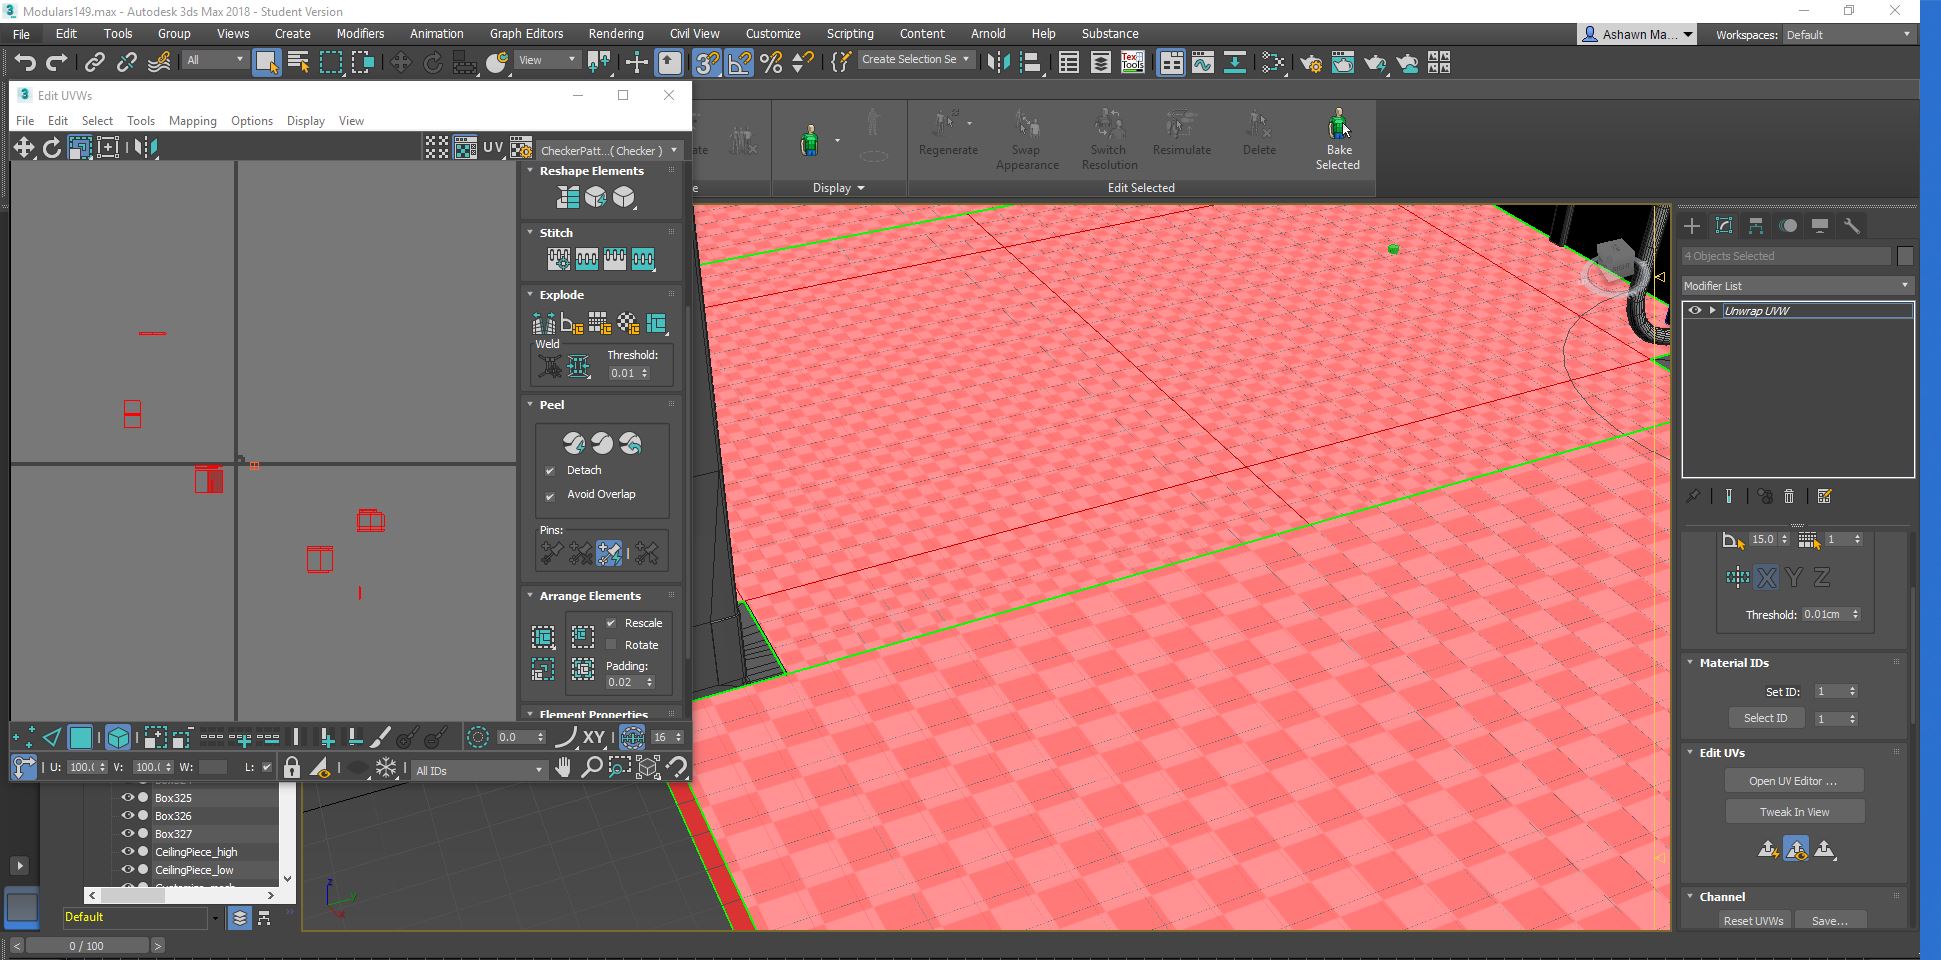 Solved: How to match Texel on two different meshes? - Autodesk Community - 3ds Max